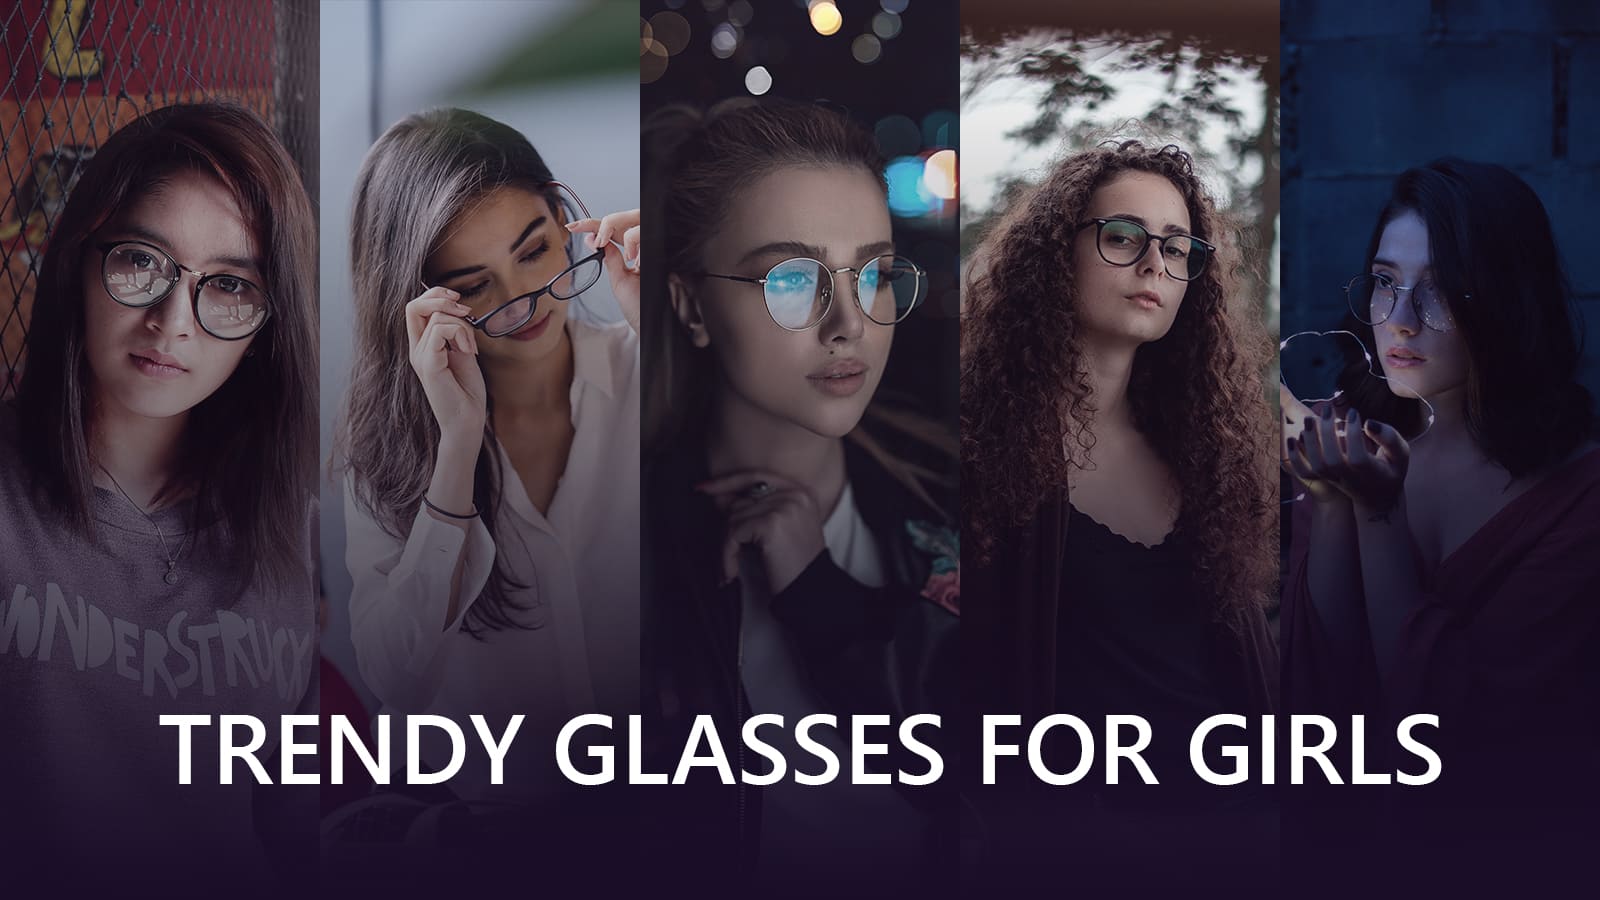 What’s new and trendy in Glasses for girls 2020?